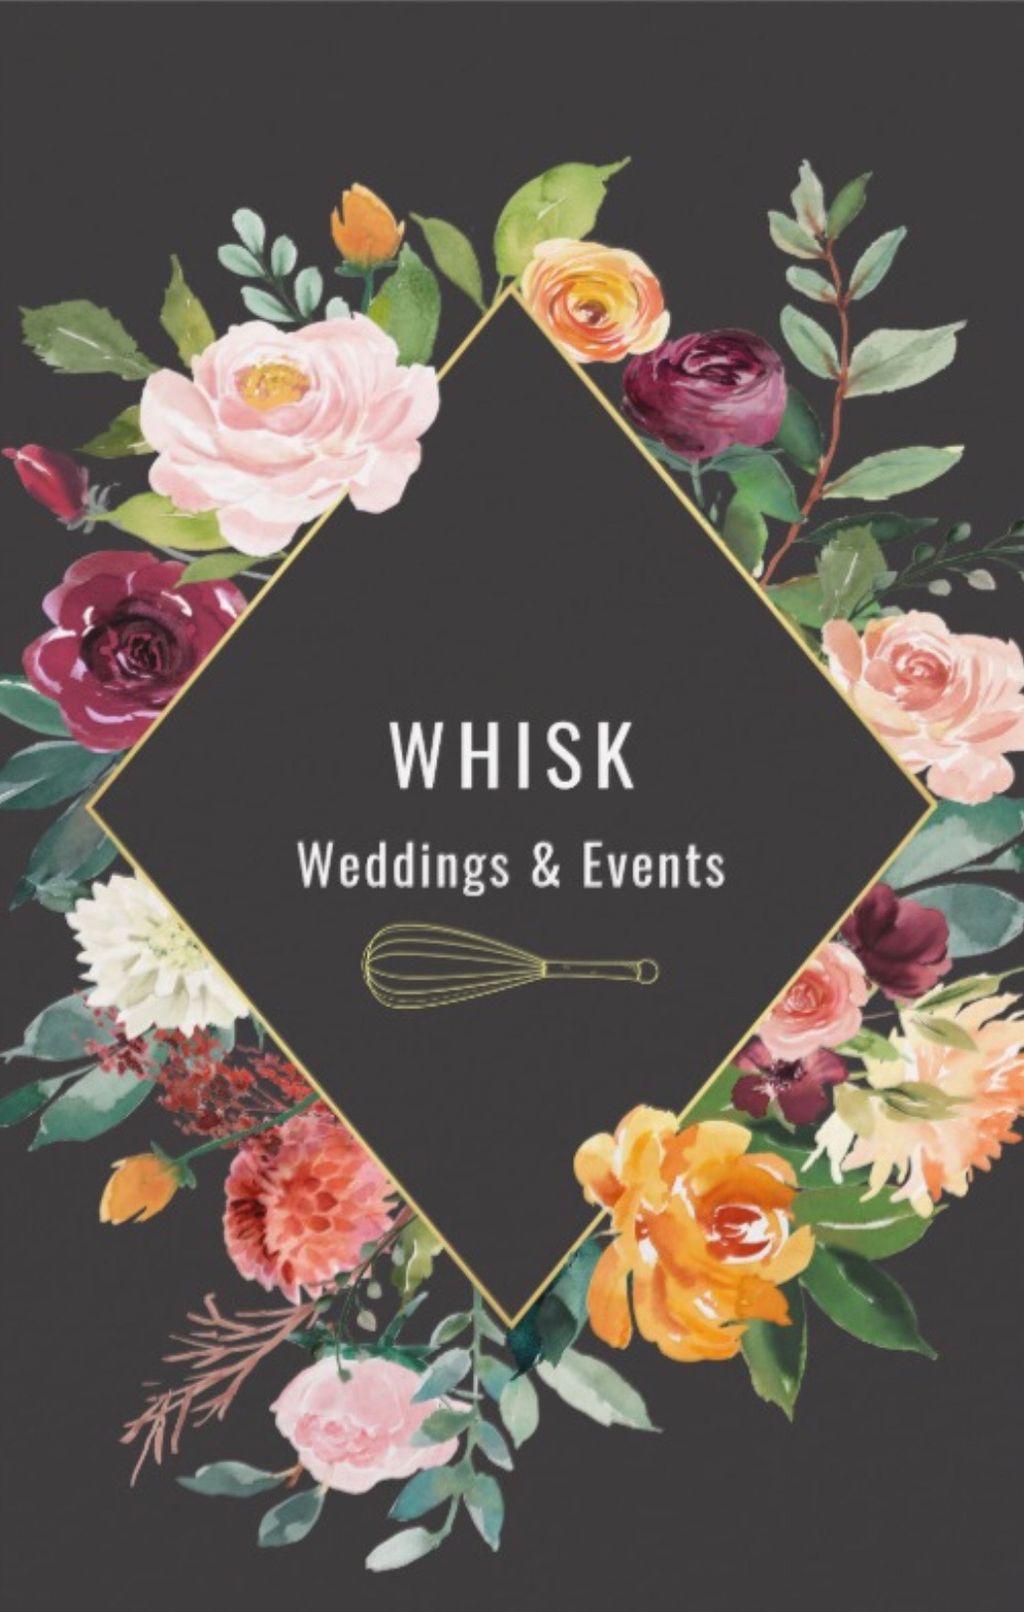 Whisk Catering & Consulting